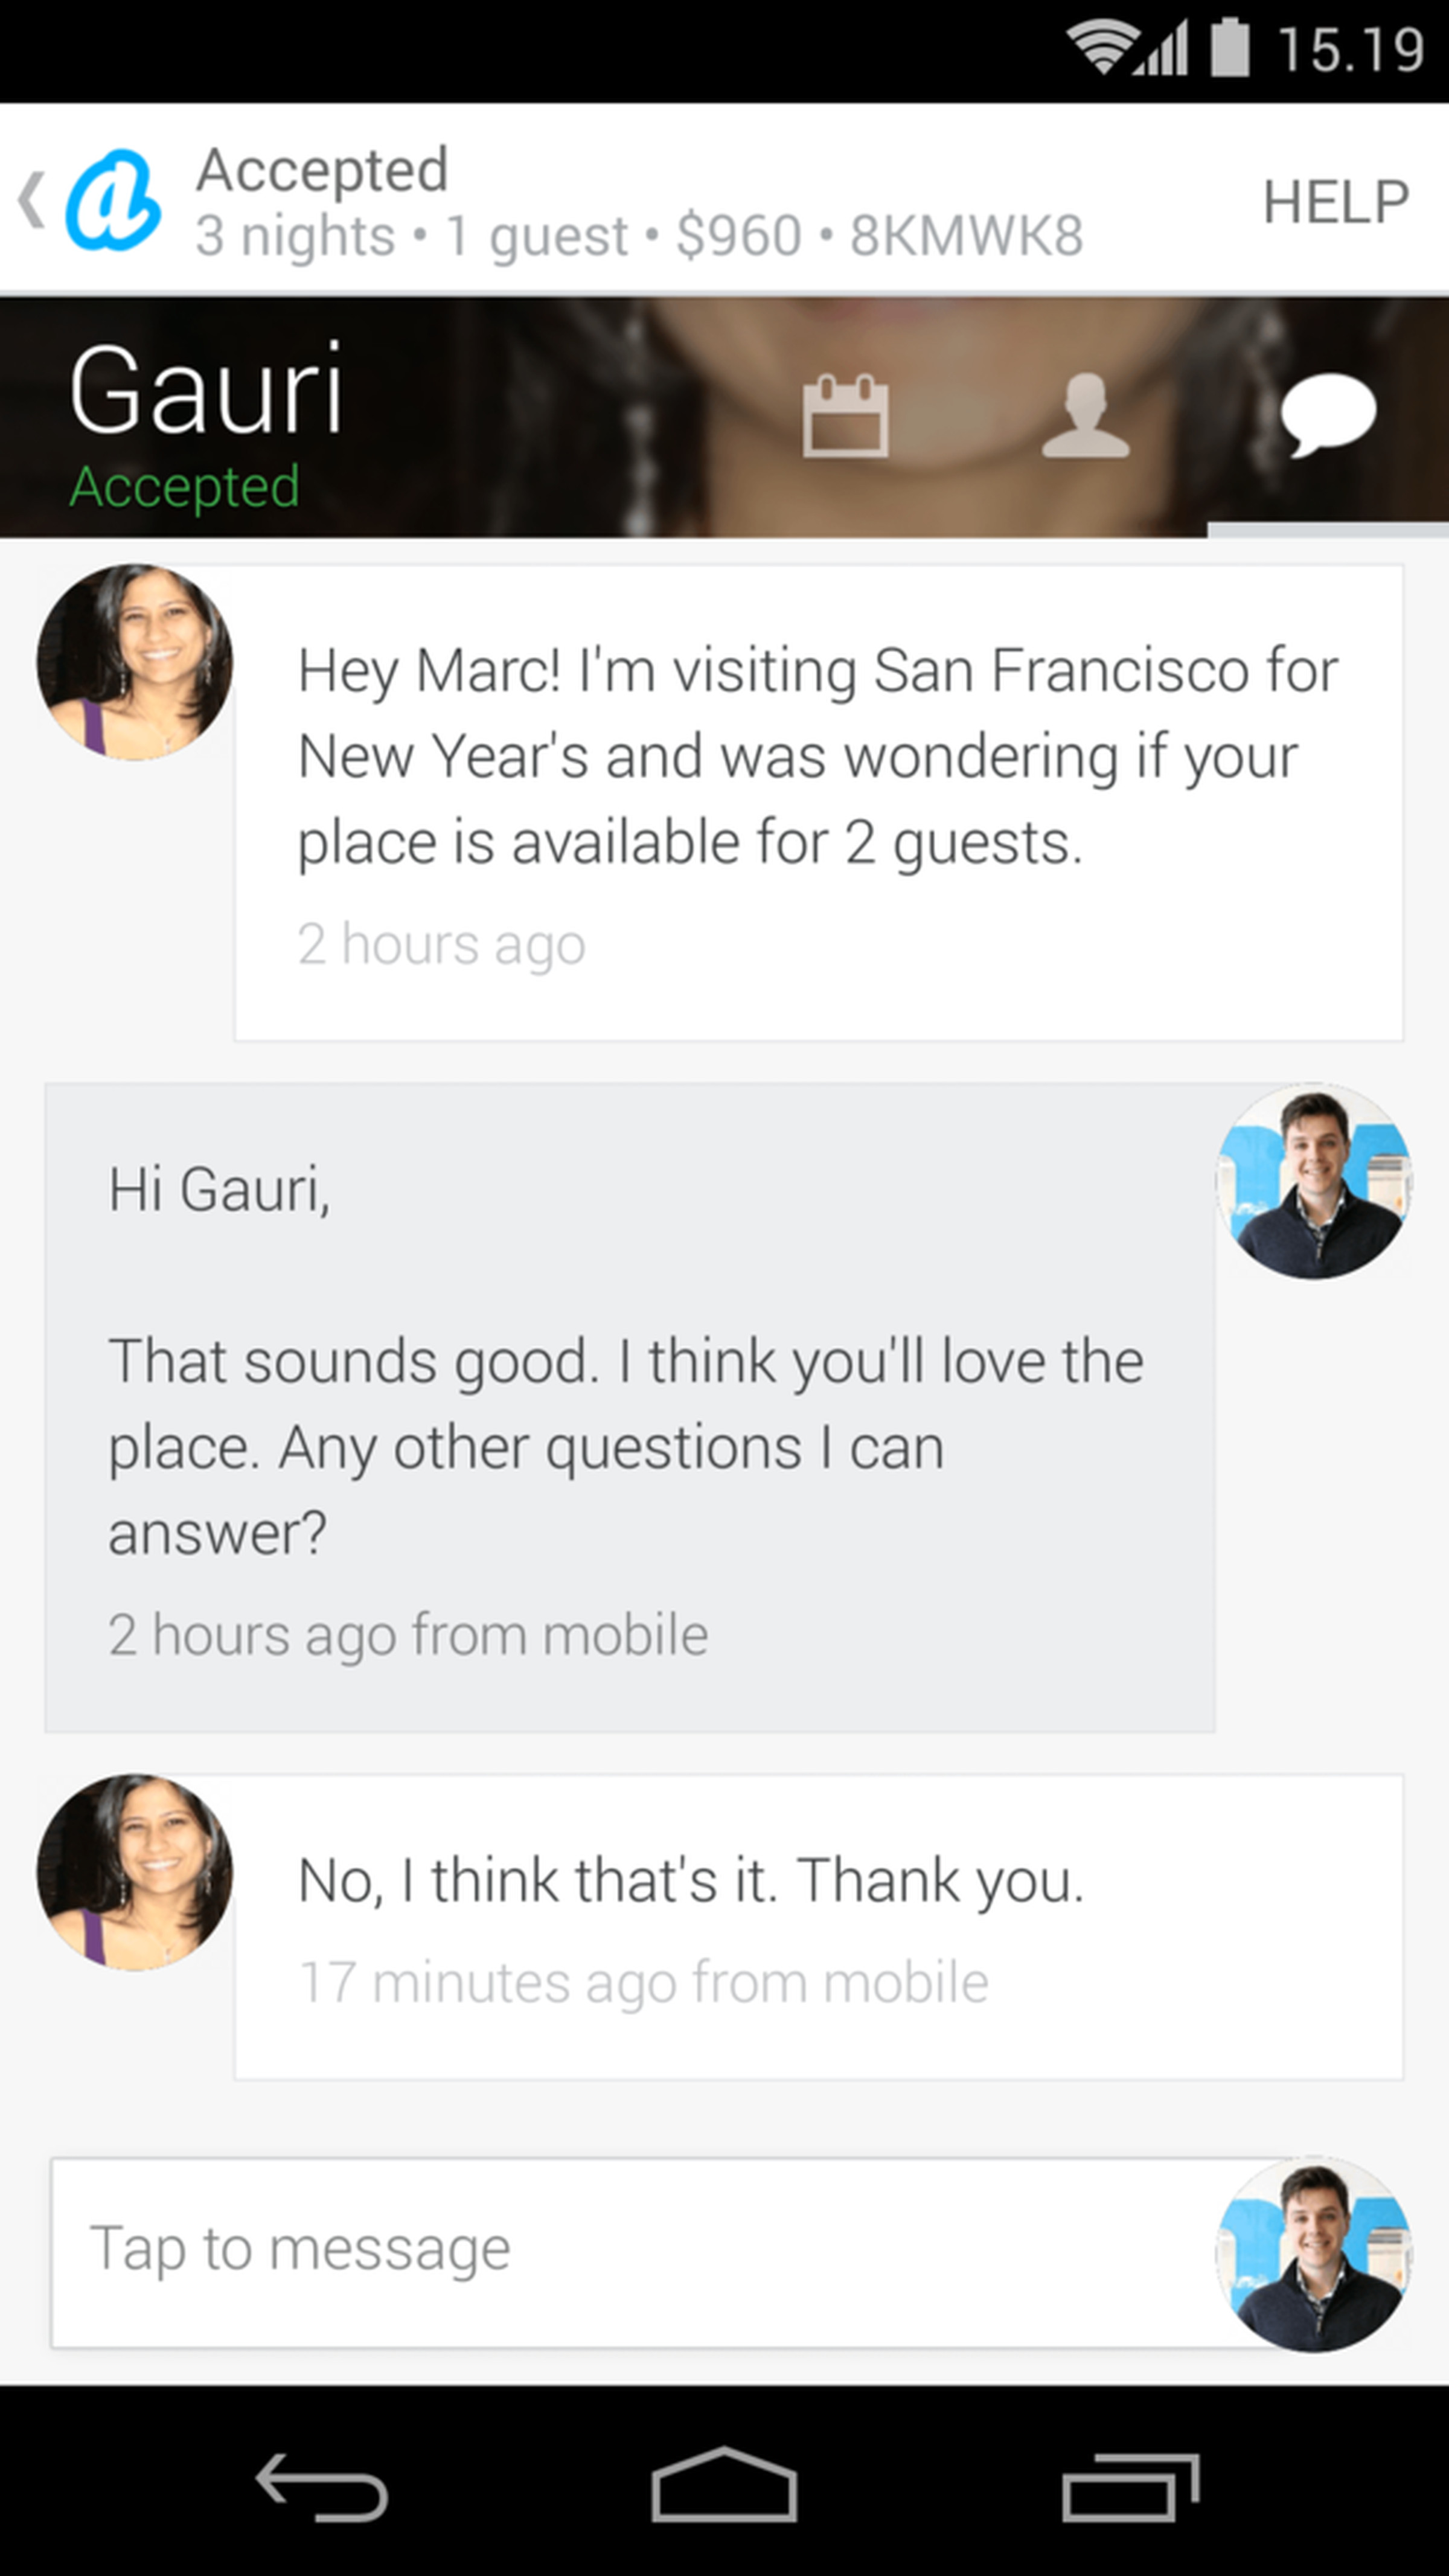 Airbnb apps redesigned for Android and iOS